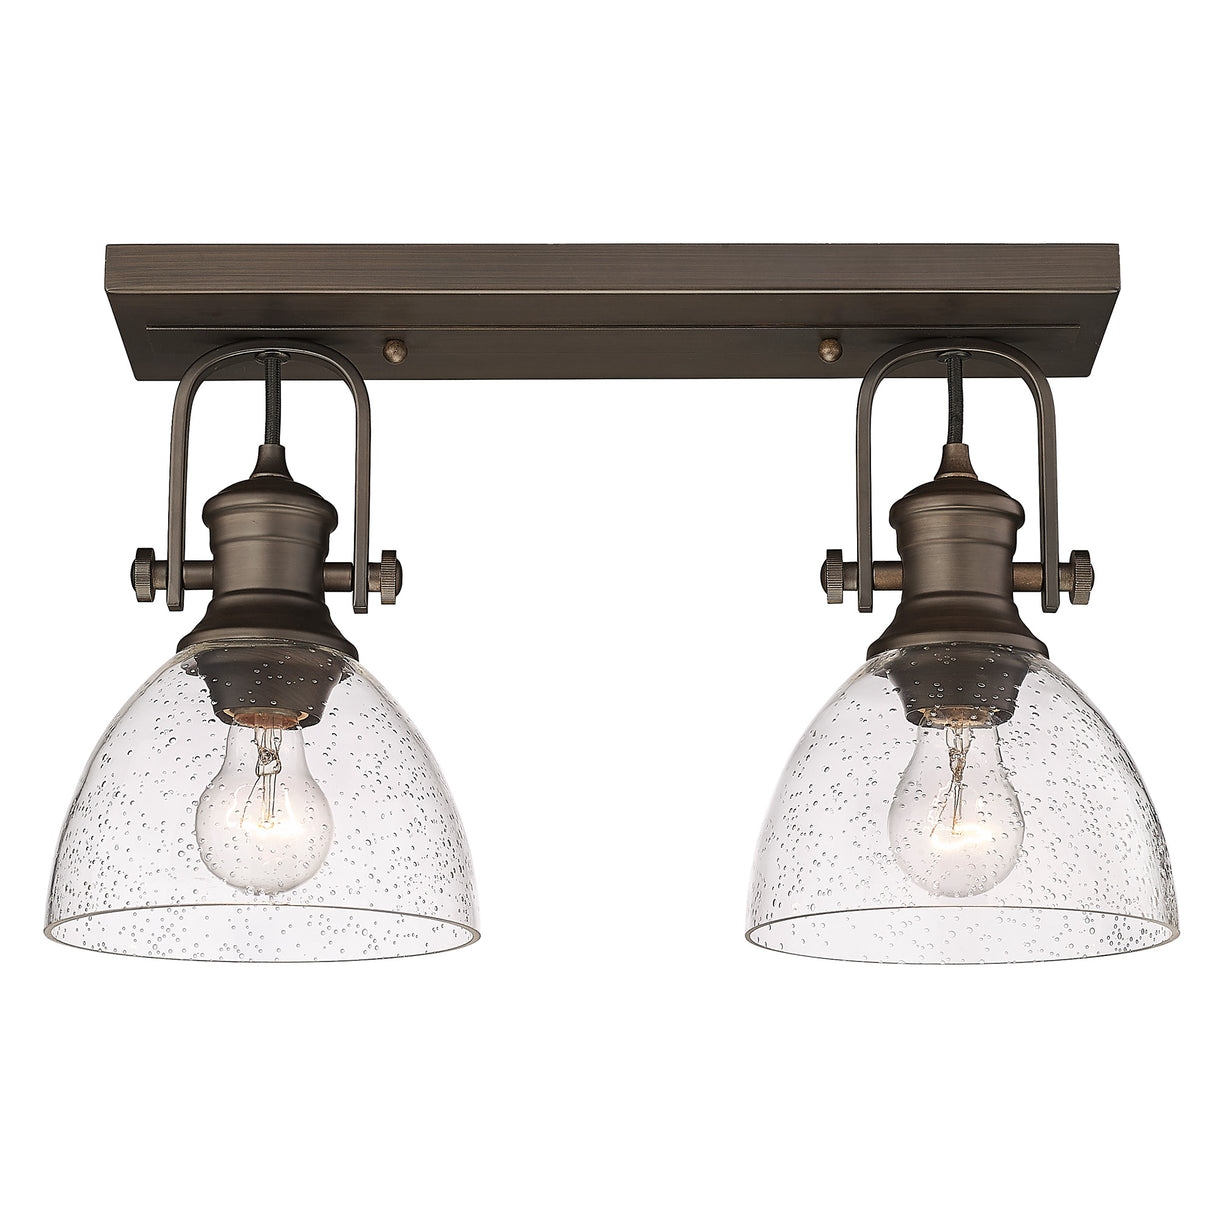 Hines 2-Light Semi-Flush in Rubbed Bronze with Seeded Glass